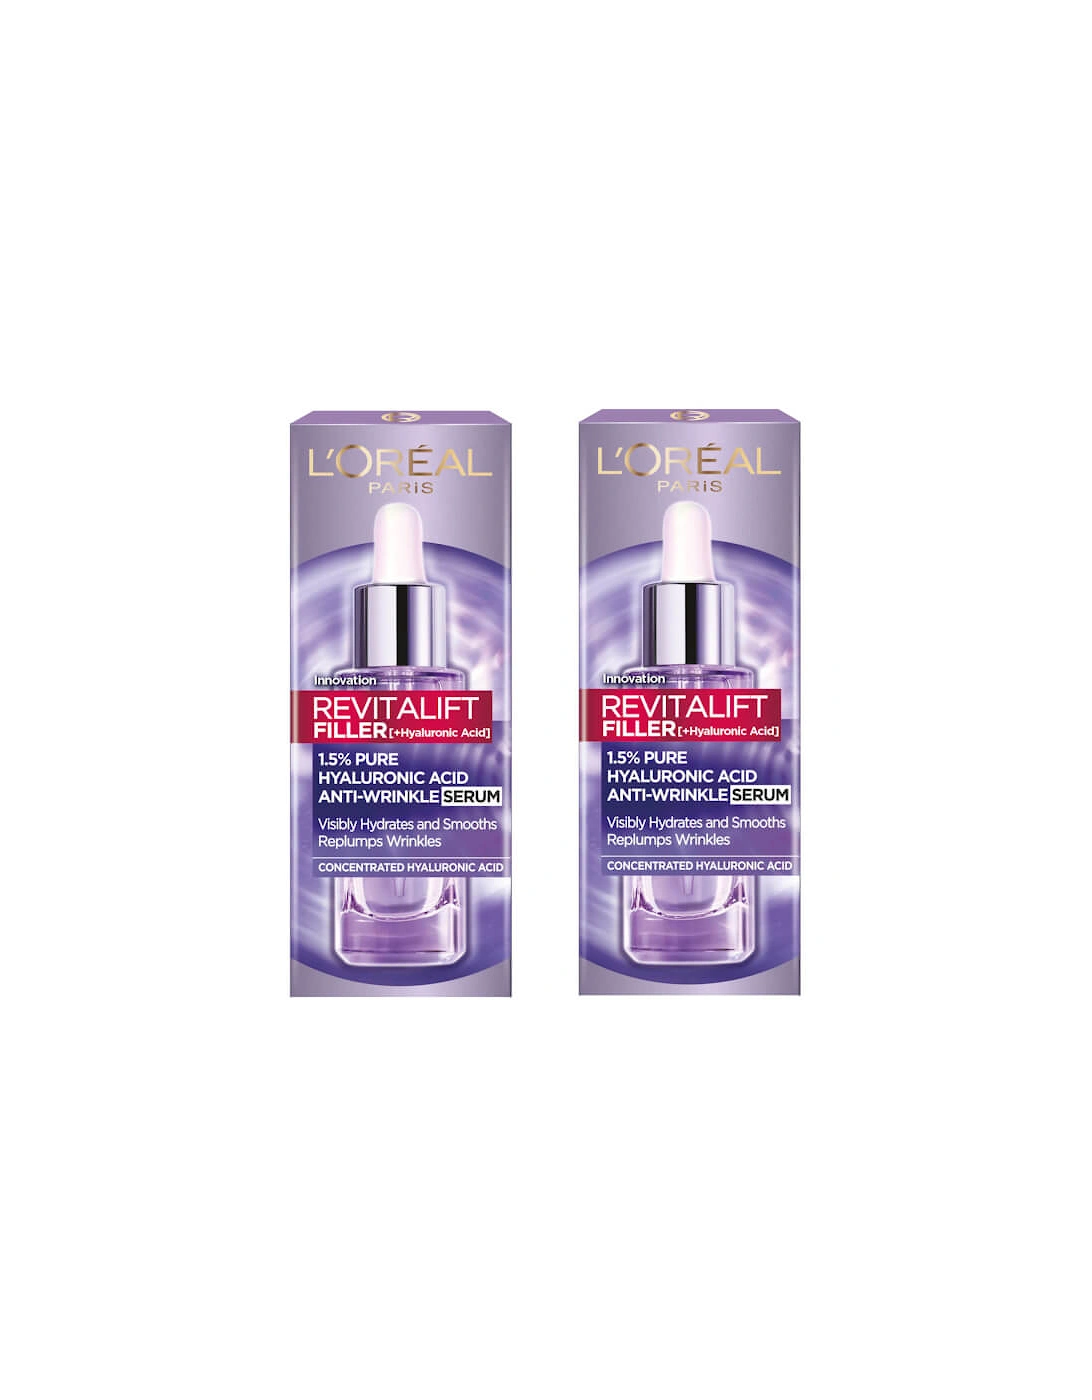 Paris Exclusive Revitalift Filler with 1.5% Hyaluronic Acid Anti-Wrinkle Dropper Serum Duo 2 x 30ml, 2 of 1